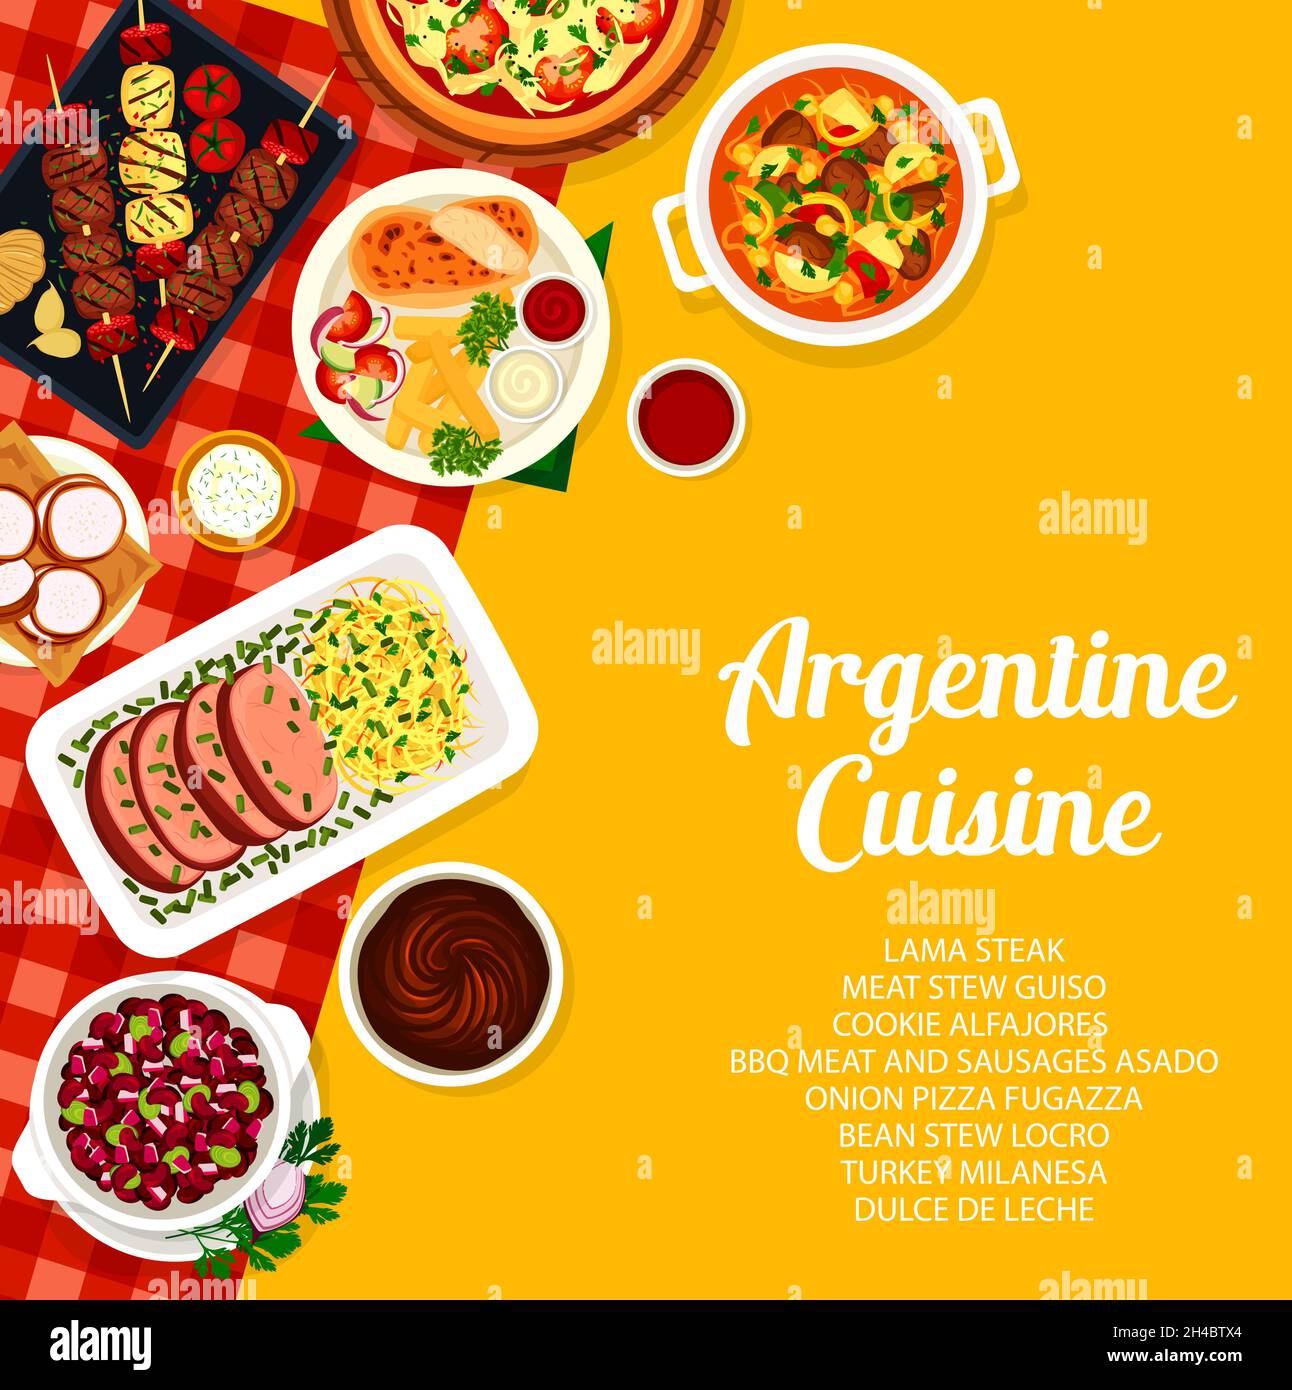 Argentine cuisine menu cover. Bbq meat and sausages Asado, meat stew Guiso and onion pizza Fugazza, Lama steak, cookie Alfajores and turkey Milanesa, Stock Vector